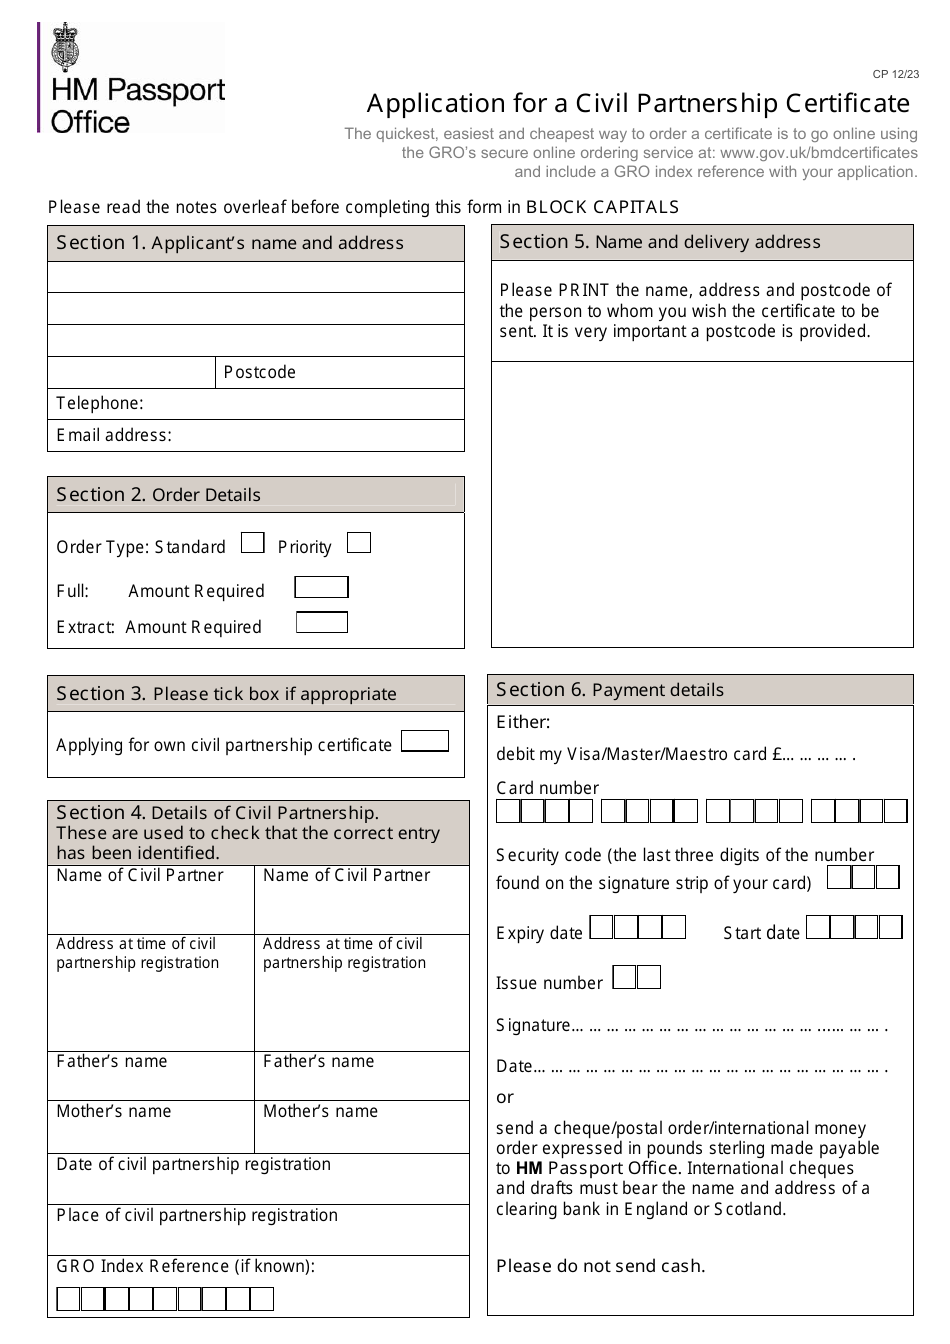 Application for a Civil Partnership Certificate - United Kingdom, Page 1